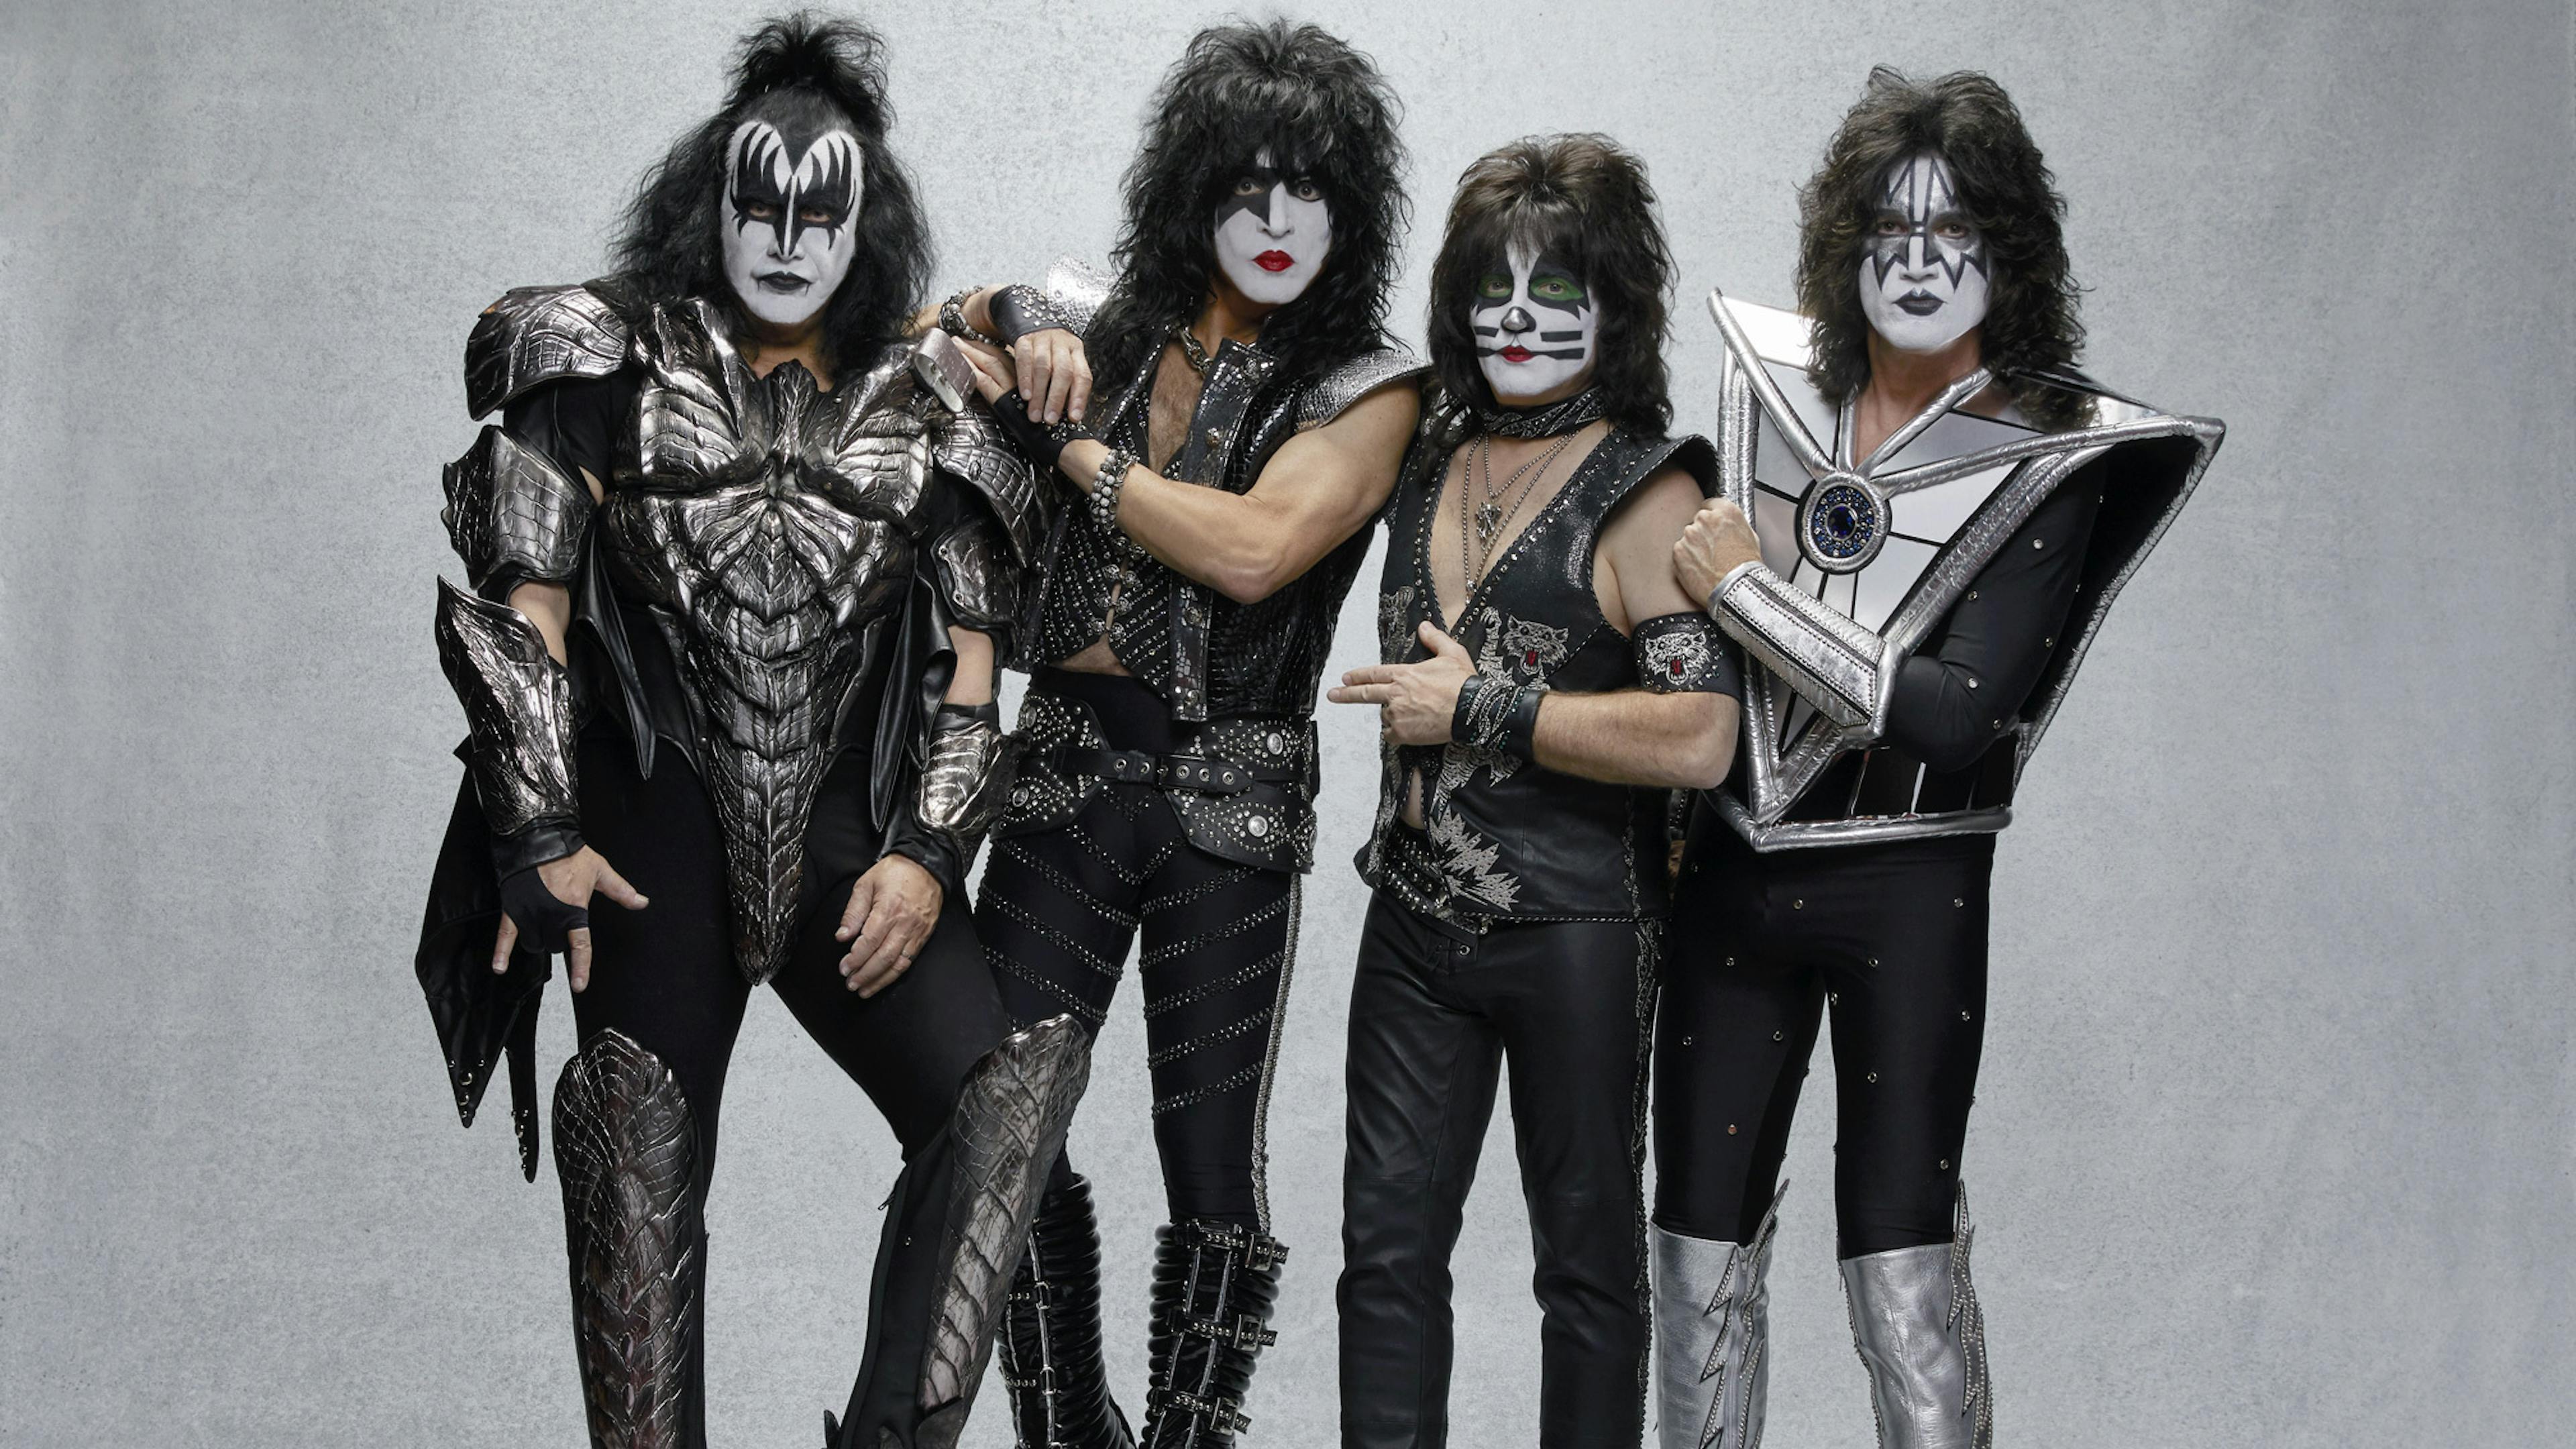 Paul Stanley confirms when KISS' farewell tour will actually end